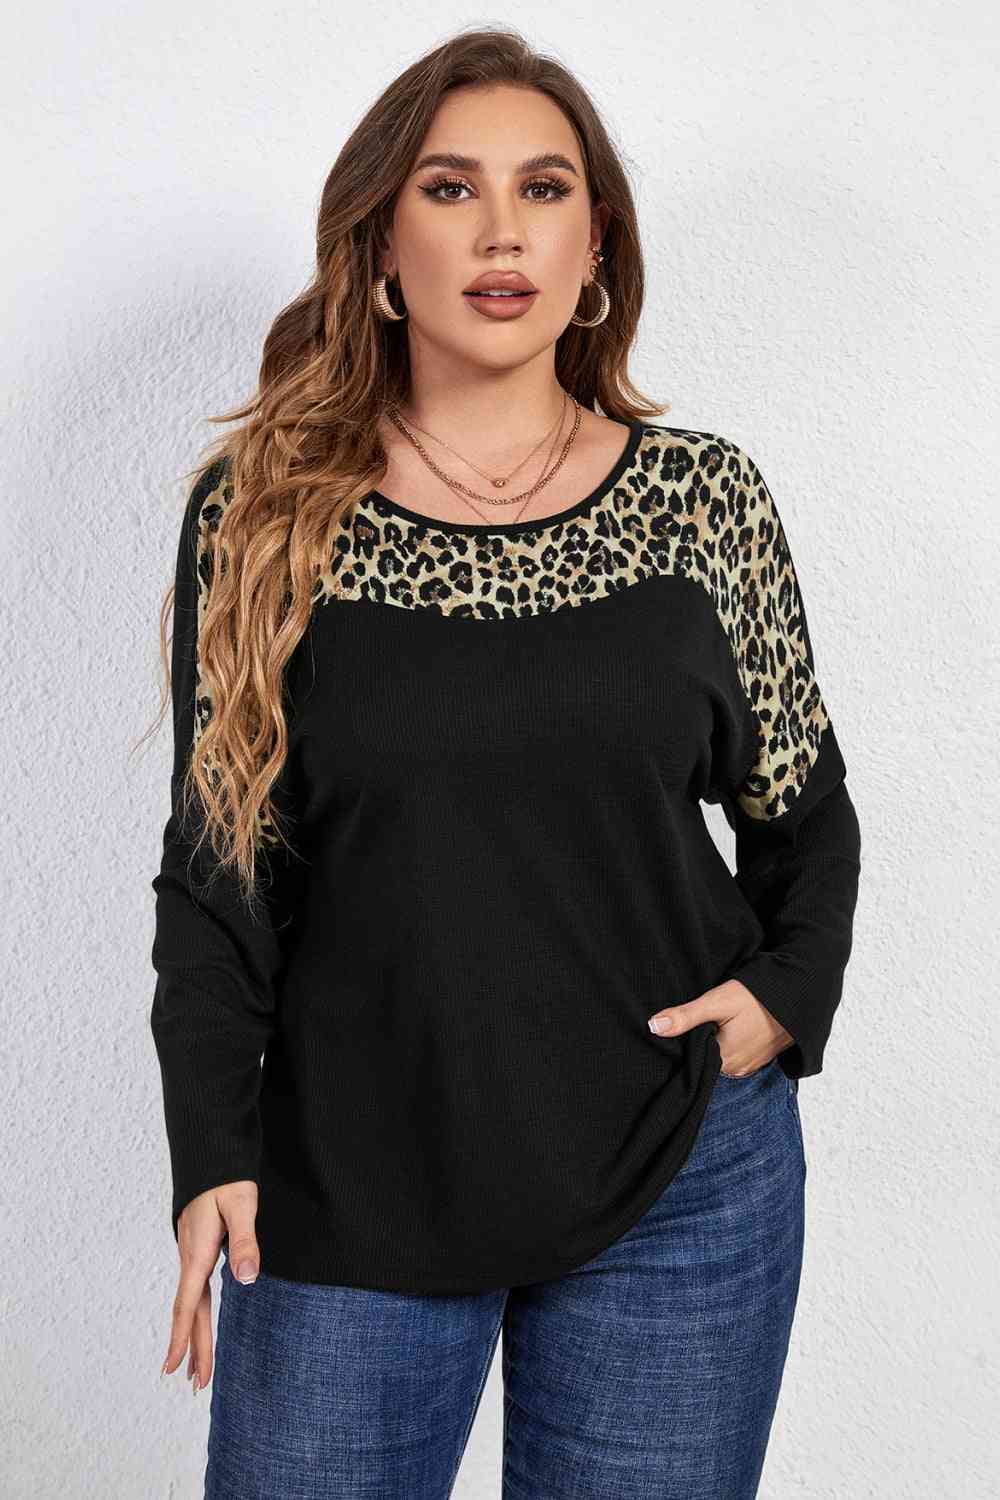 Melo Apparel Plus Size Leopard Trim Round Neck Long Sleeve Tee - Just Enuff Sexy